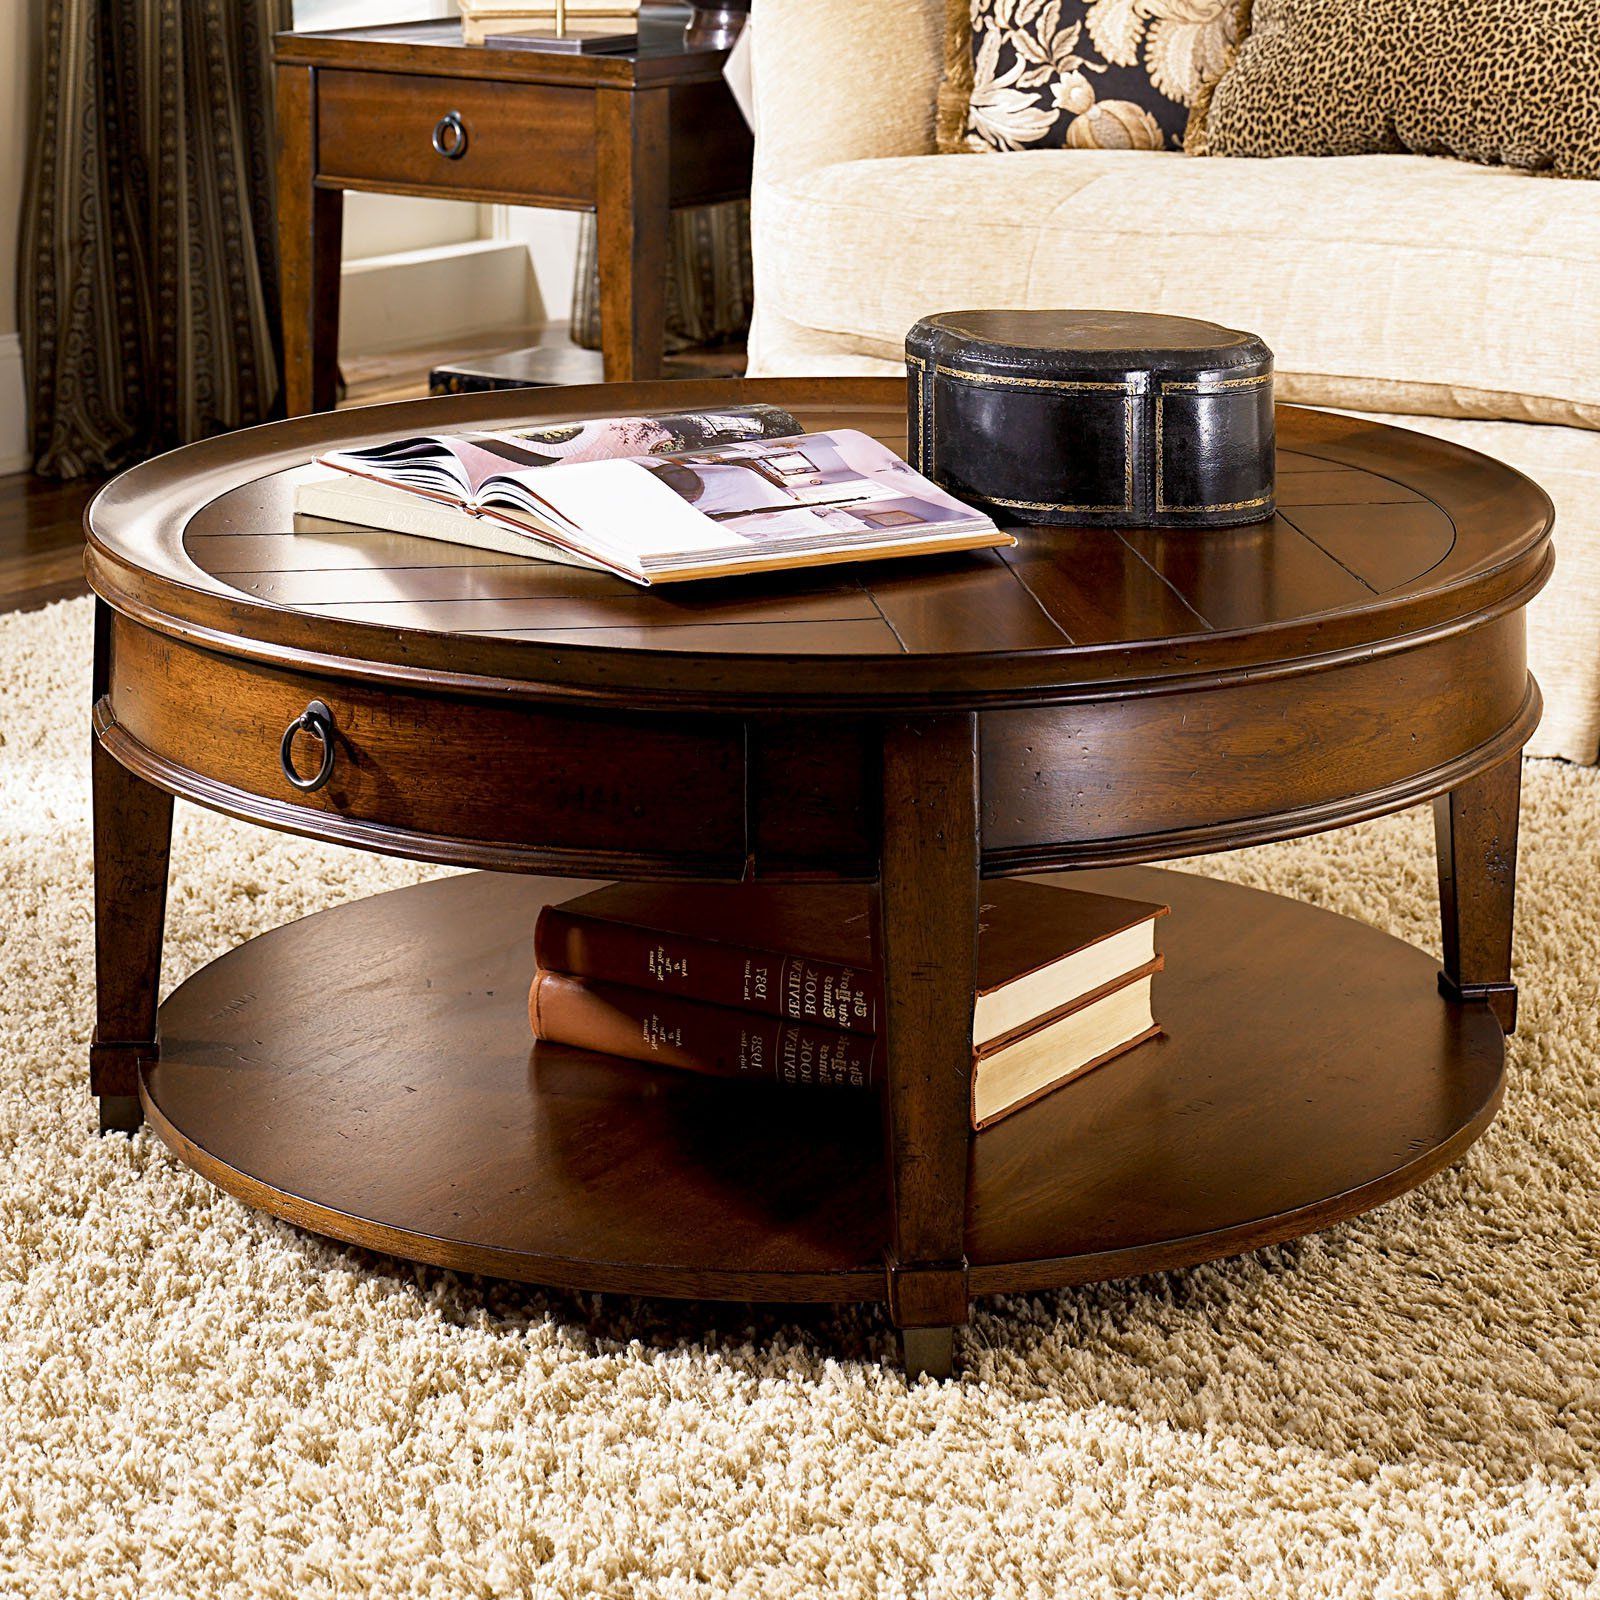 Famous Round Coffee Tables With Storage With Regard To Hammary Sunset Valley Round Cocktail Table – Rich Mahogany (View 12 of 15)